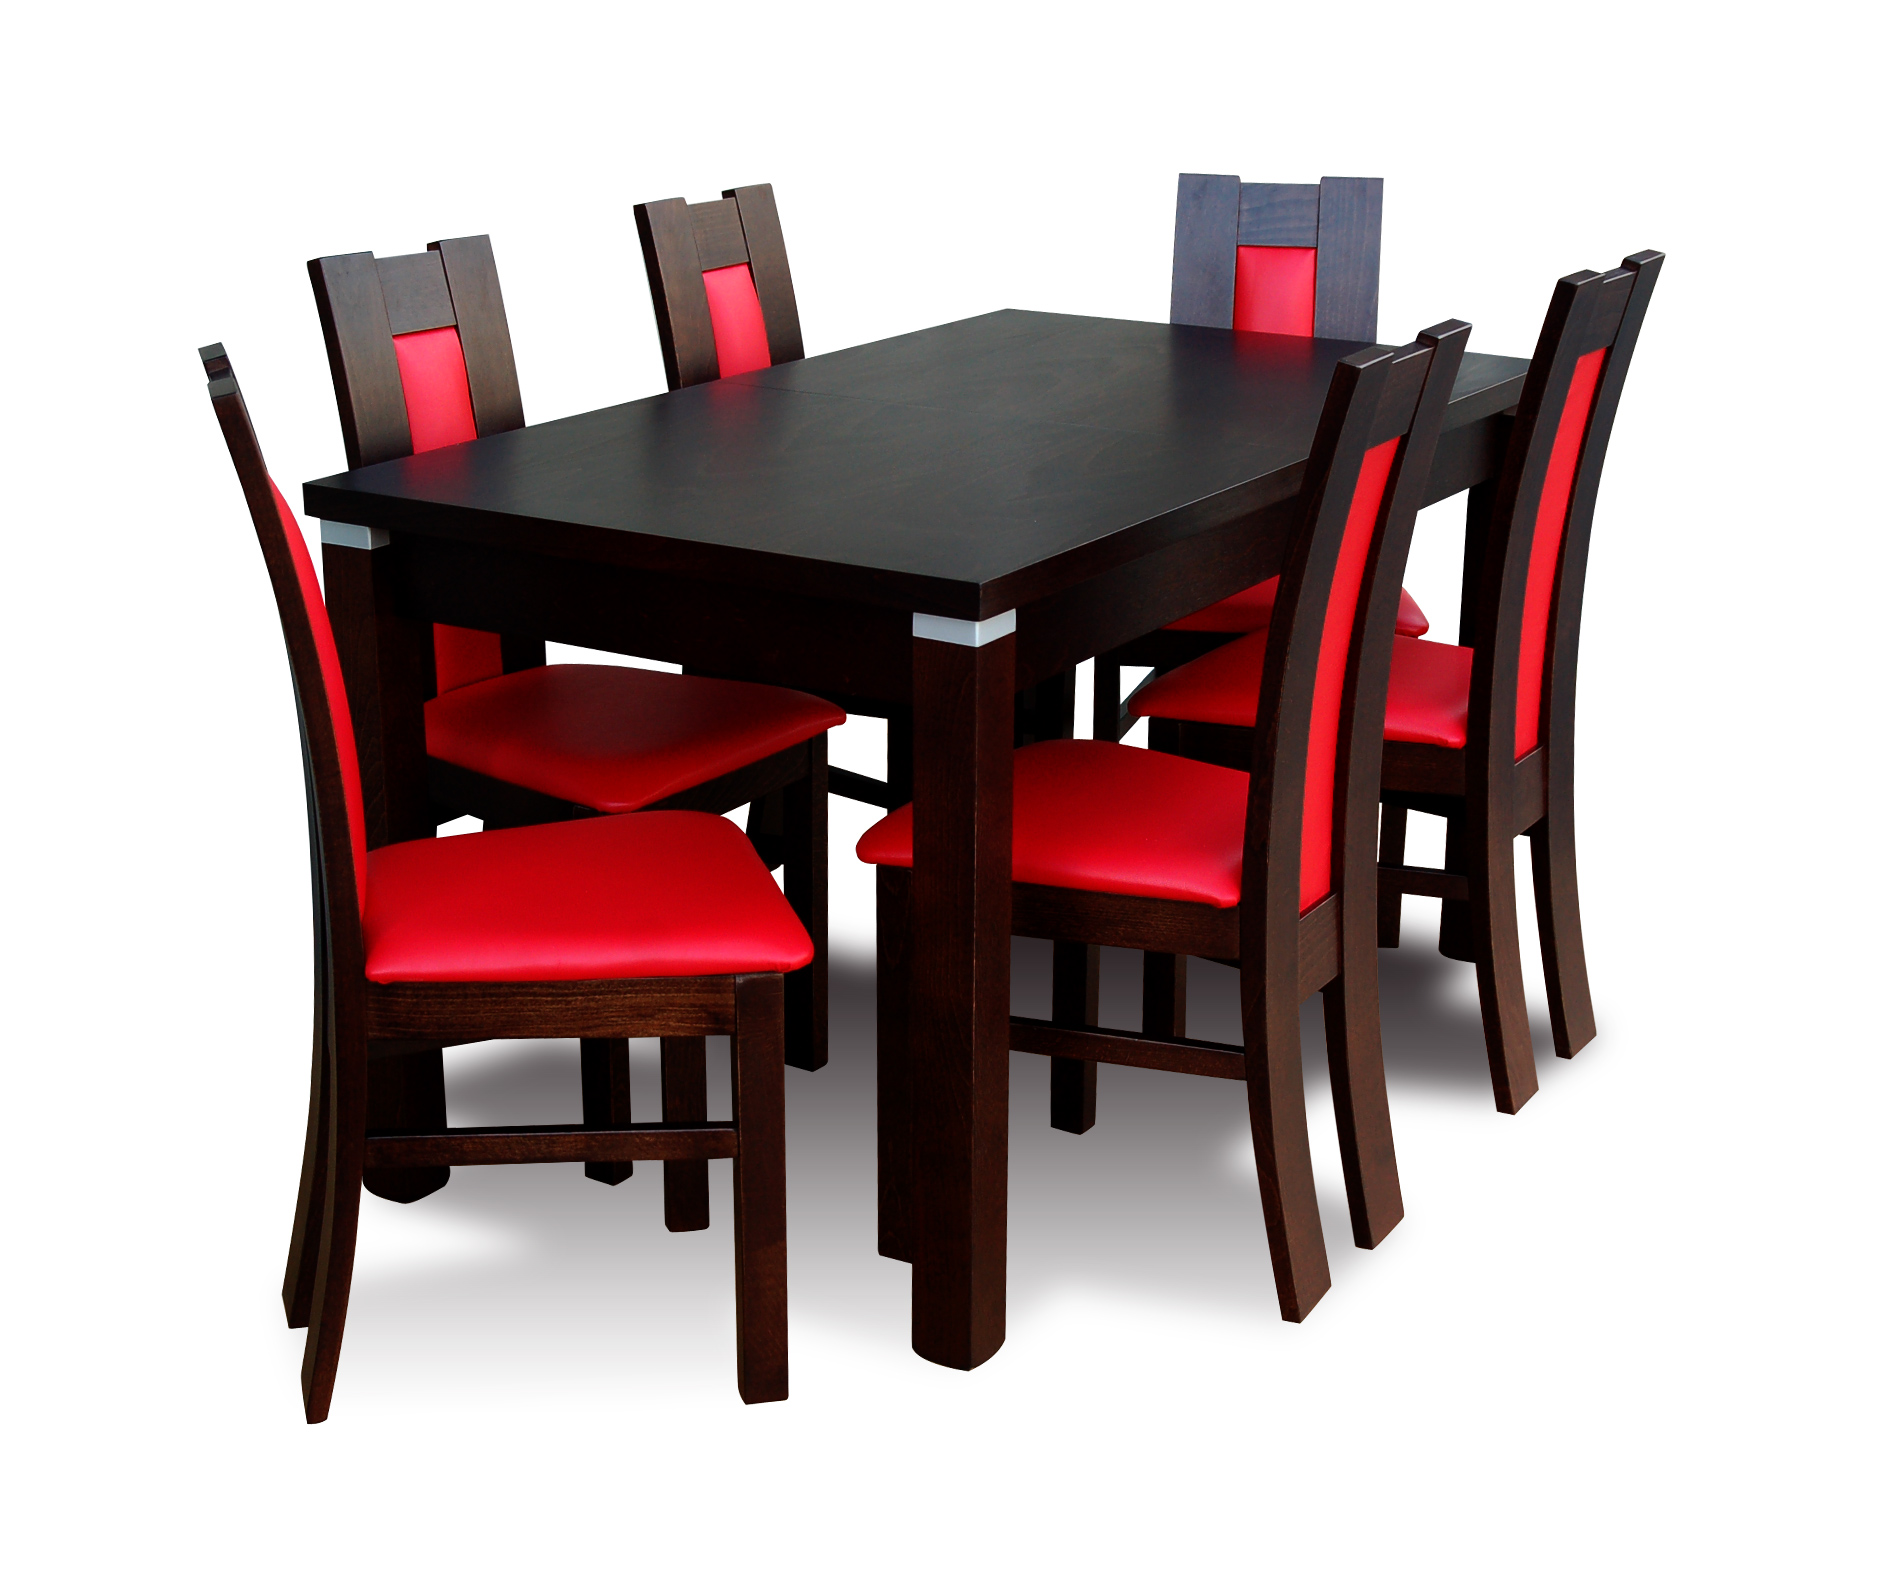 Modern dining room table chair set tables + 6 chairs designer dining set wood